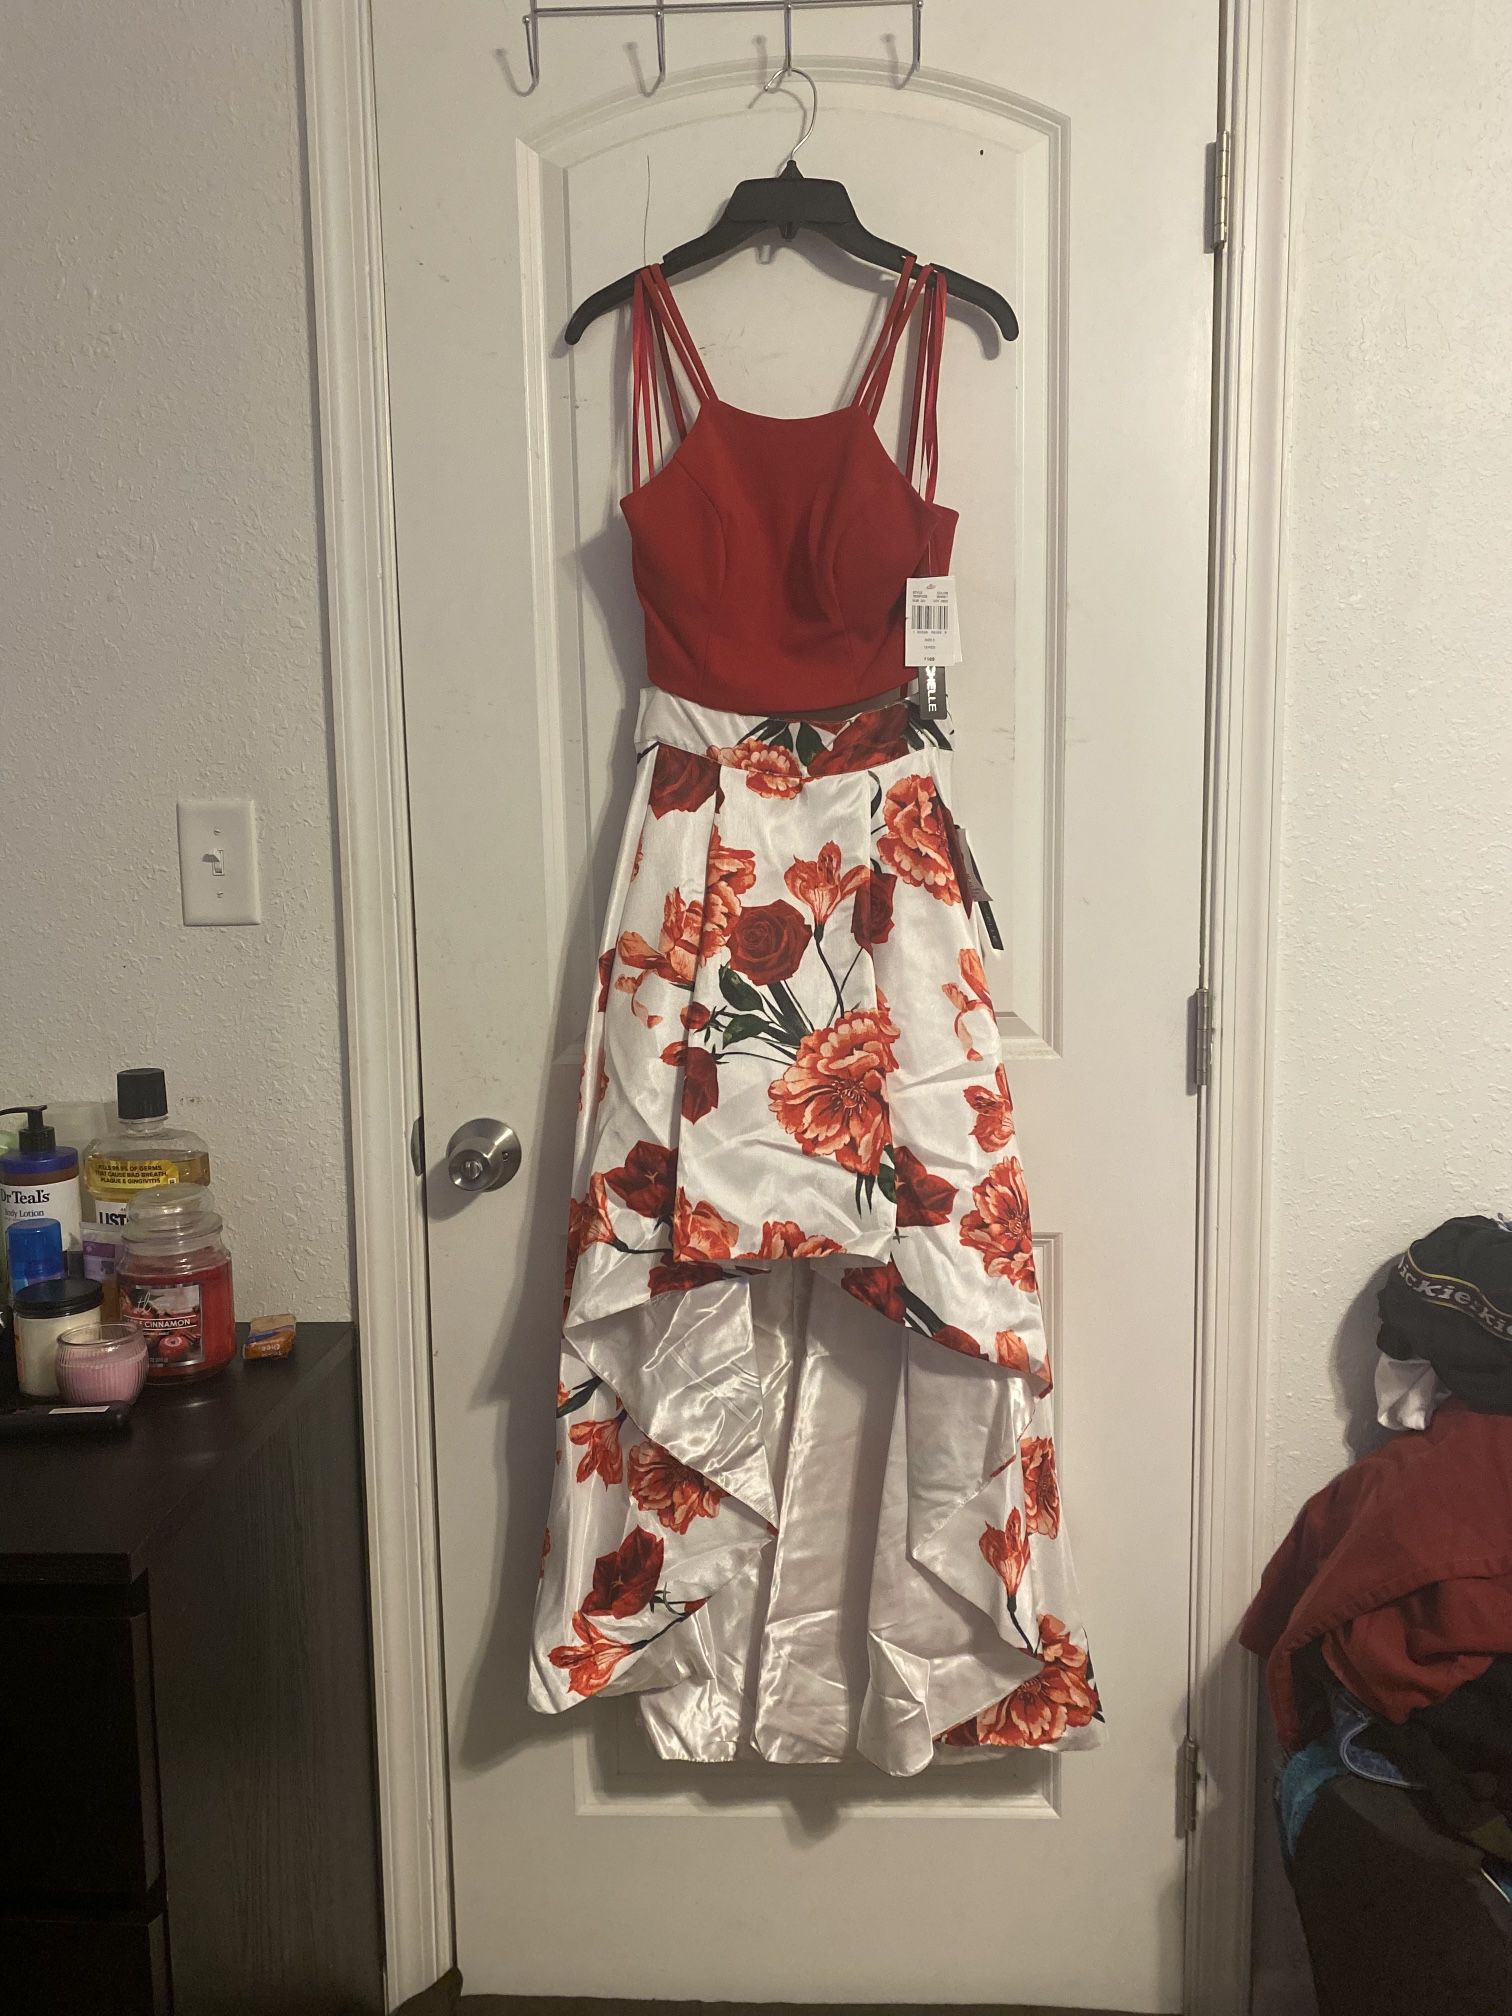 2 piece, Multi-color(mostly red and white), size 5